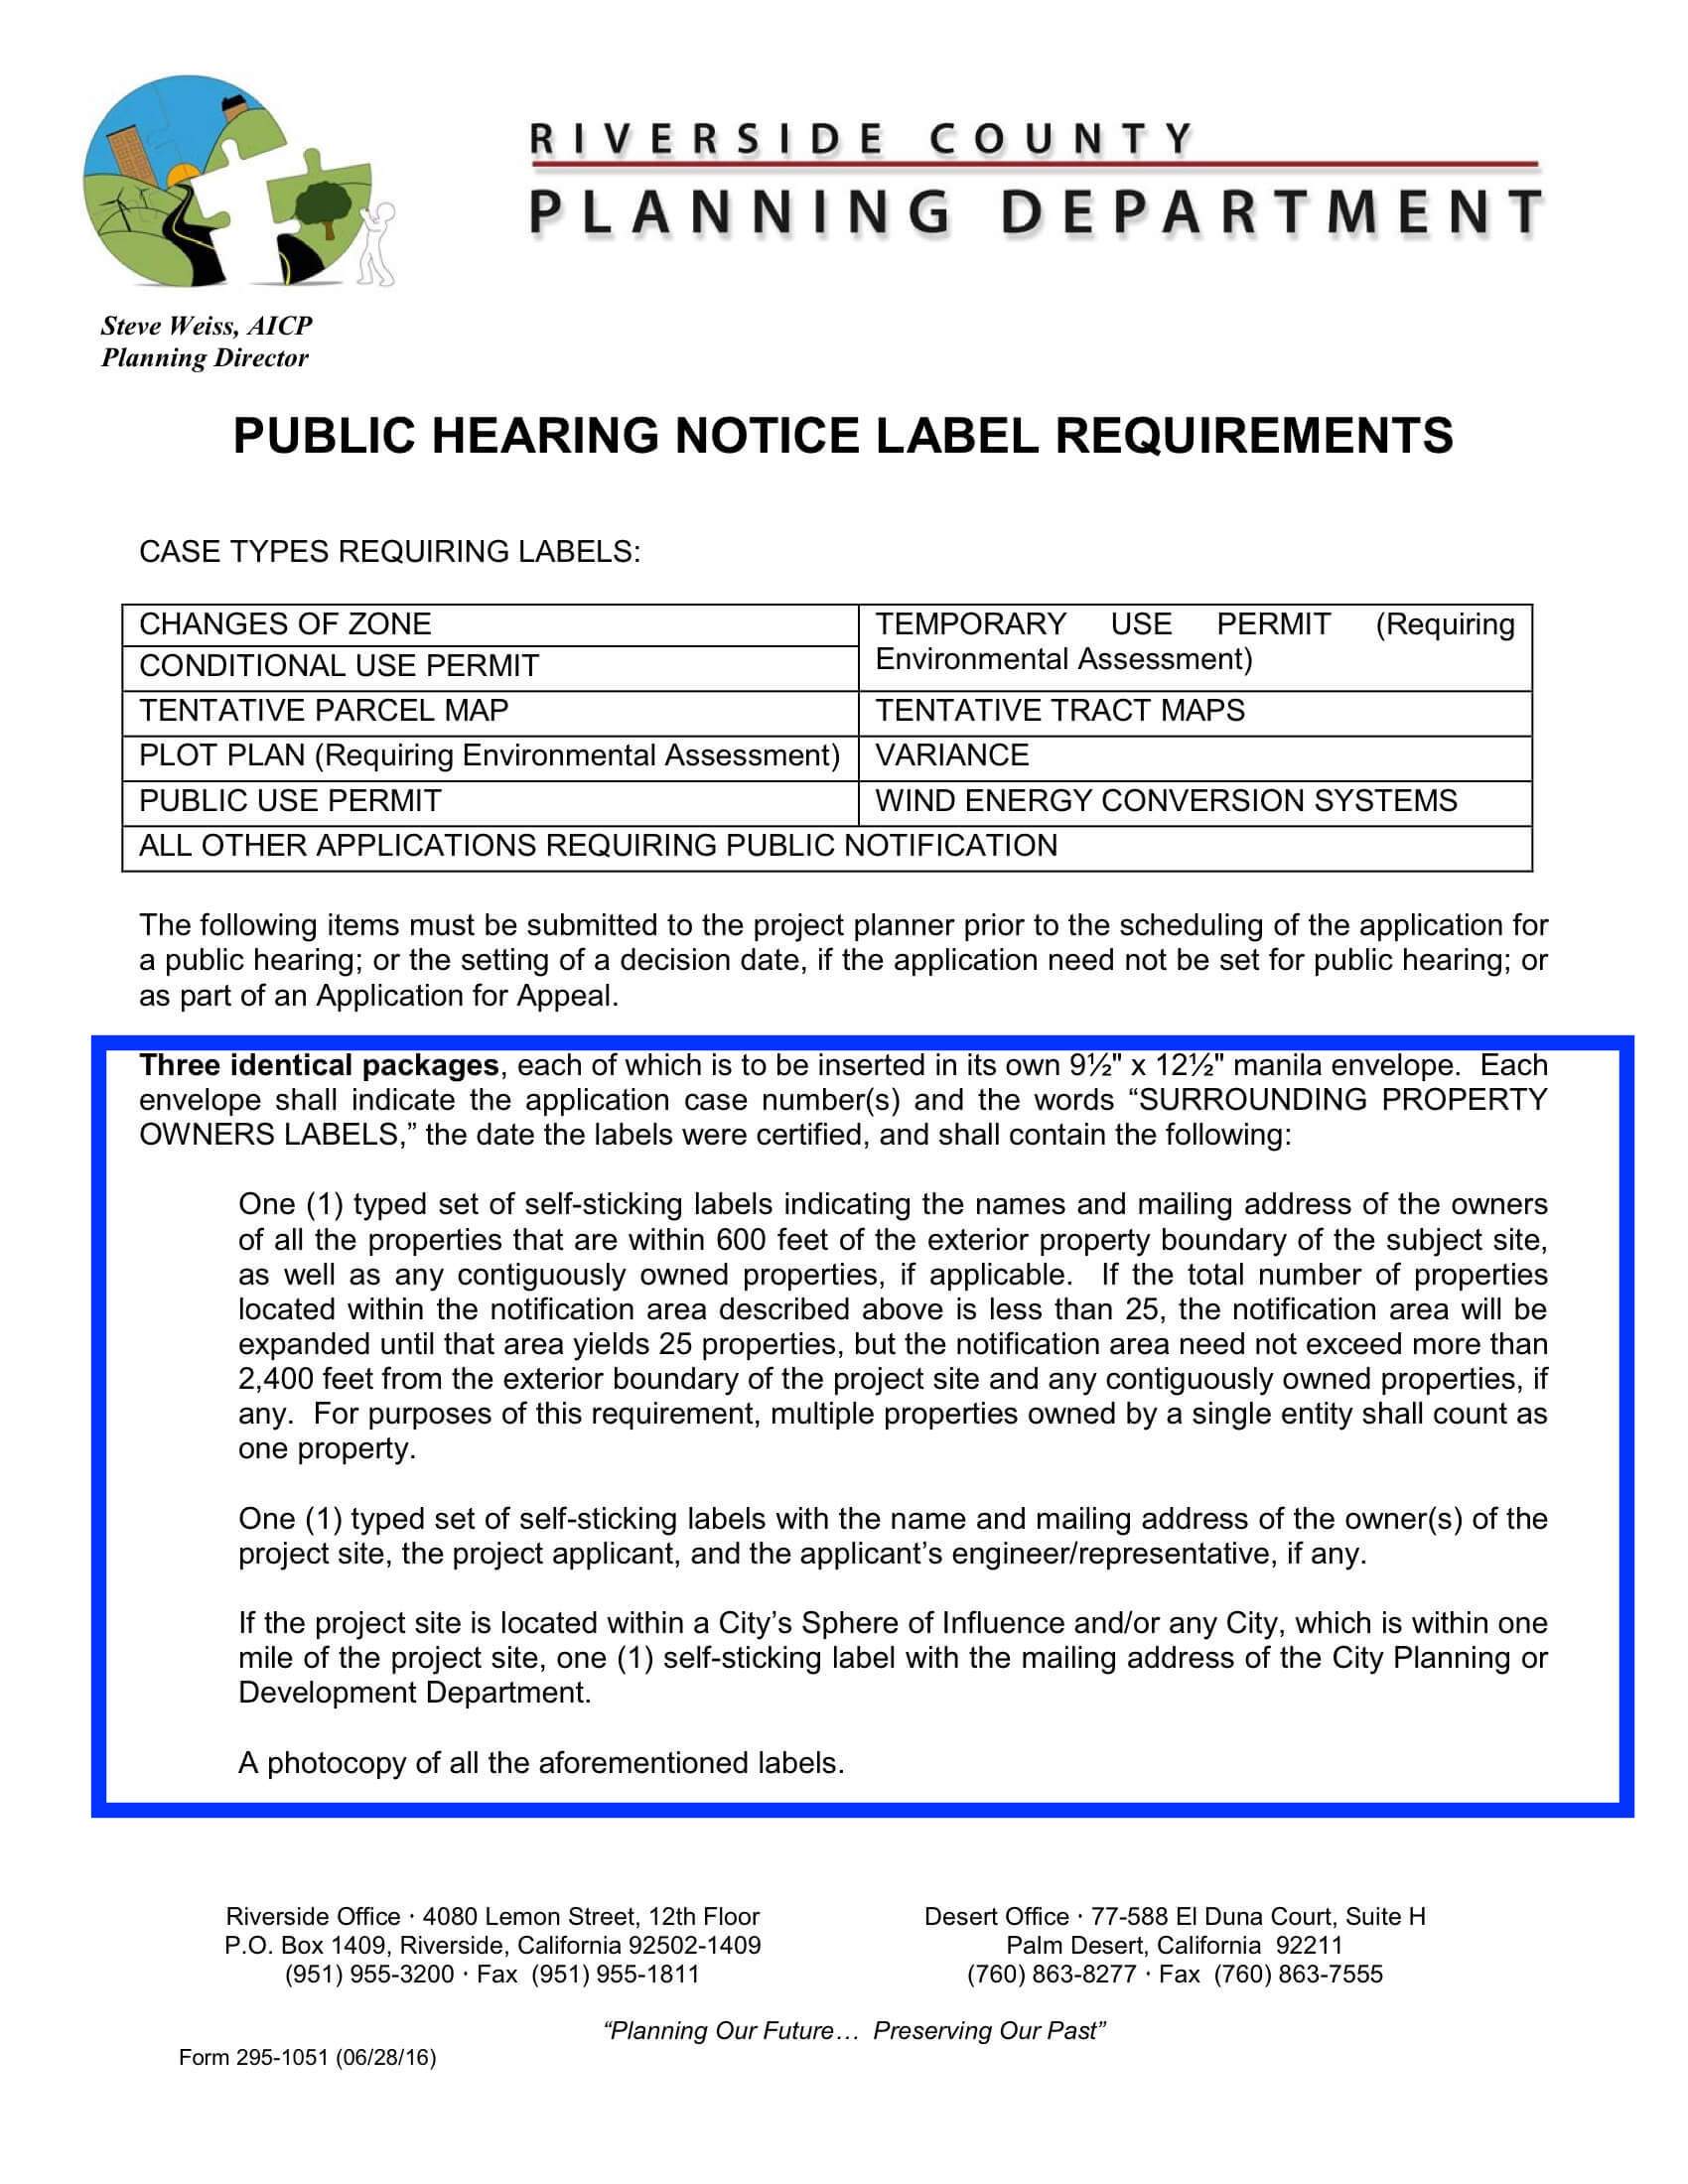 County Of Riverside-Riverside County-Public Hearing Notice Label Requirements-Certification Form-Exhibit Map-600 Feet